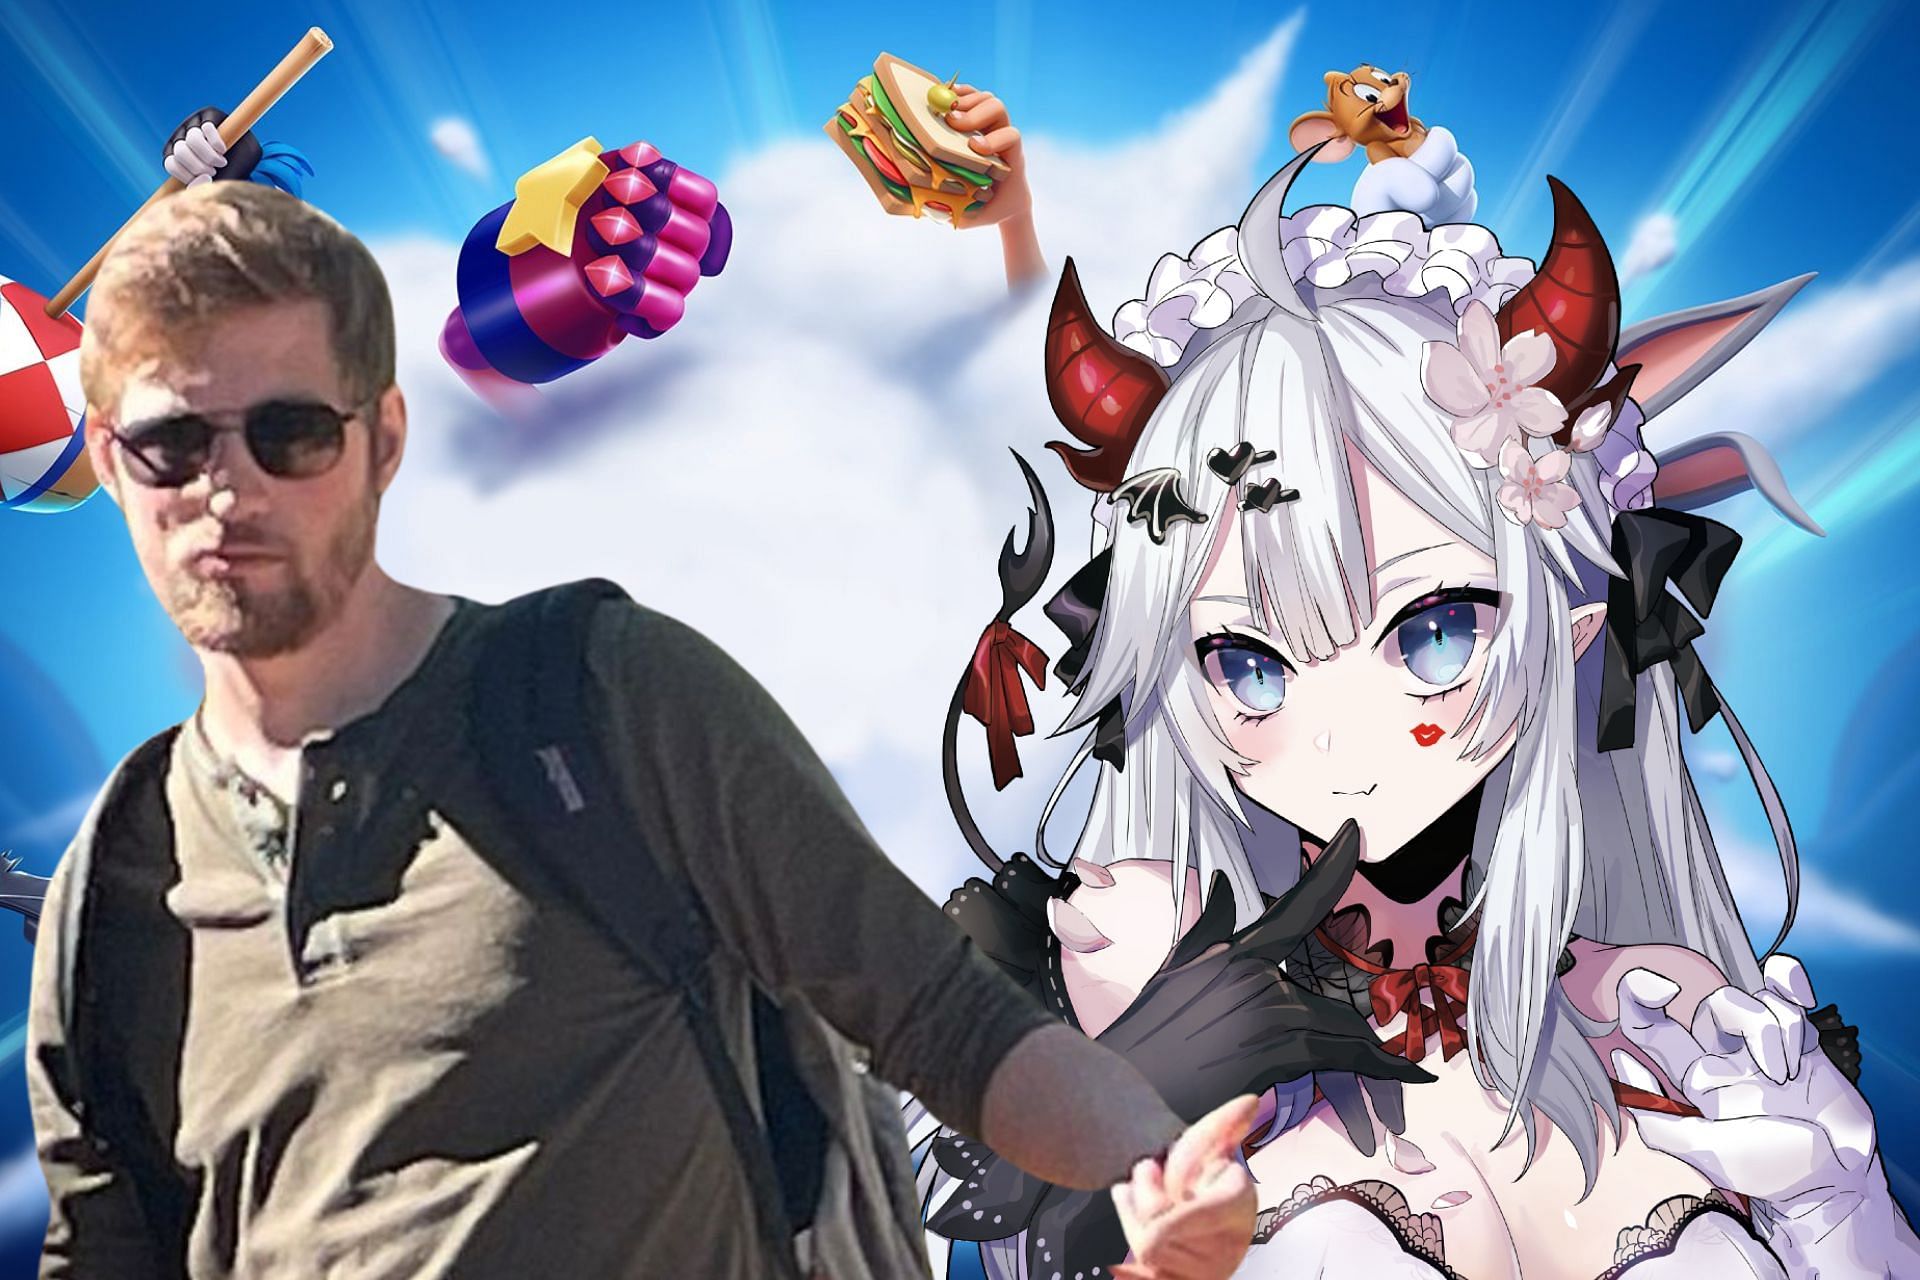 VTuber Veibae claims spending time with Sodapoppin has made her &quot;openly toxic&quot; (Image via Sportskeeda)